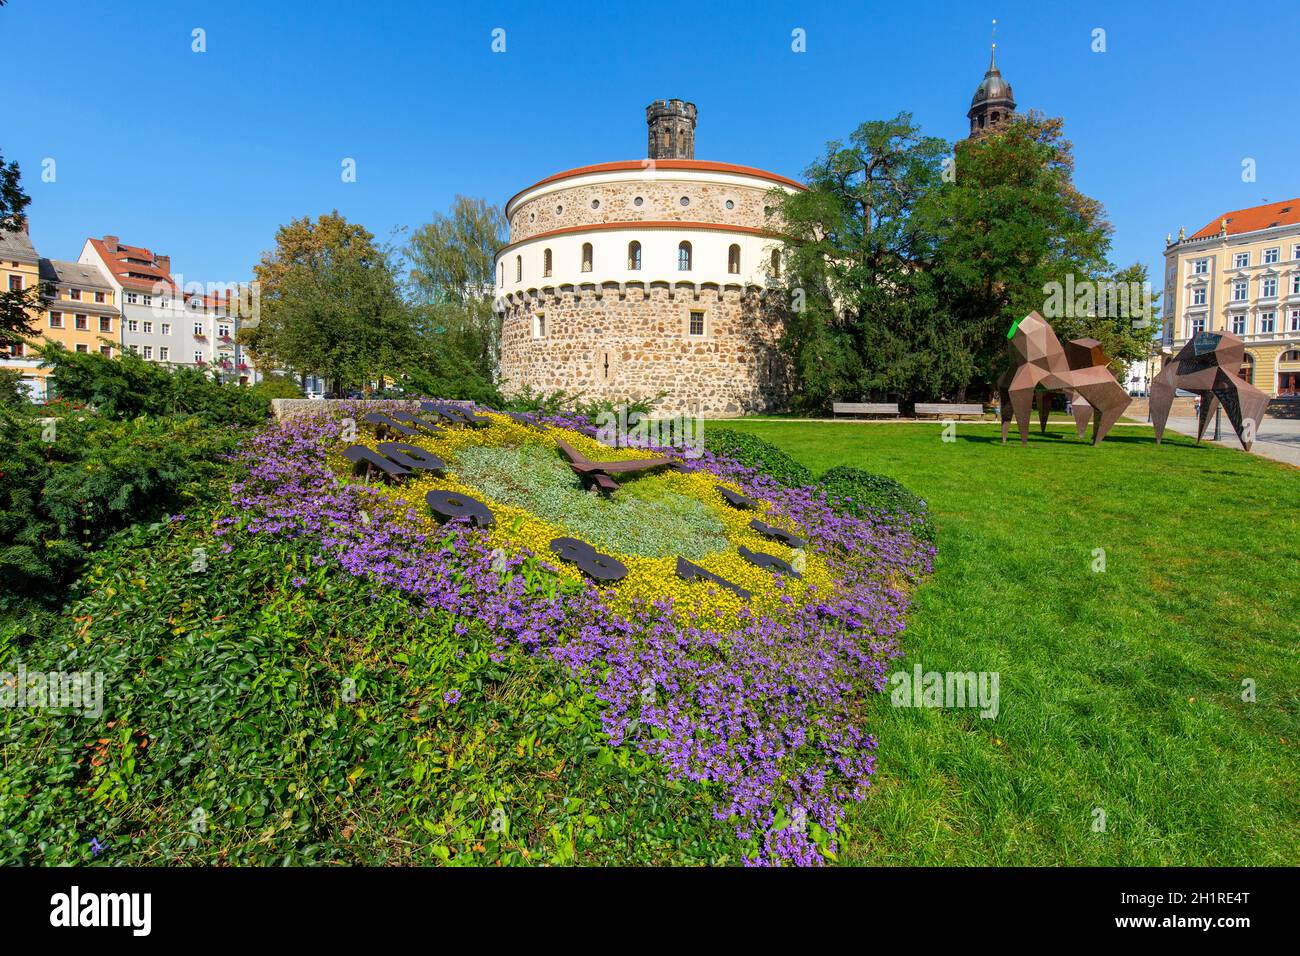 Goerlitz, Germany - September 22, 2020 : Kaisertrutz Bastion, the seat of the Museum of cultural history (Kulturhistorisches Museum), Demiani square Stock Photo